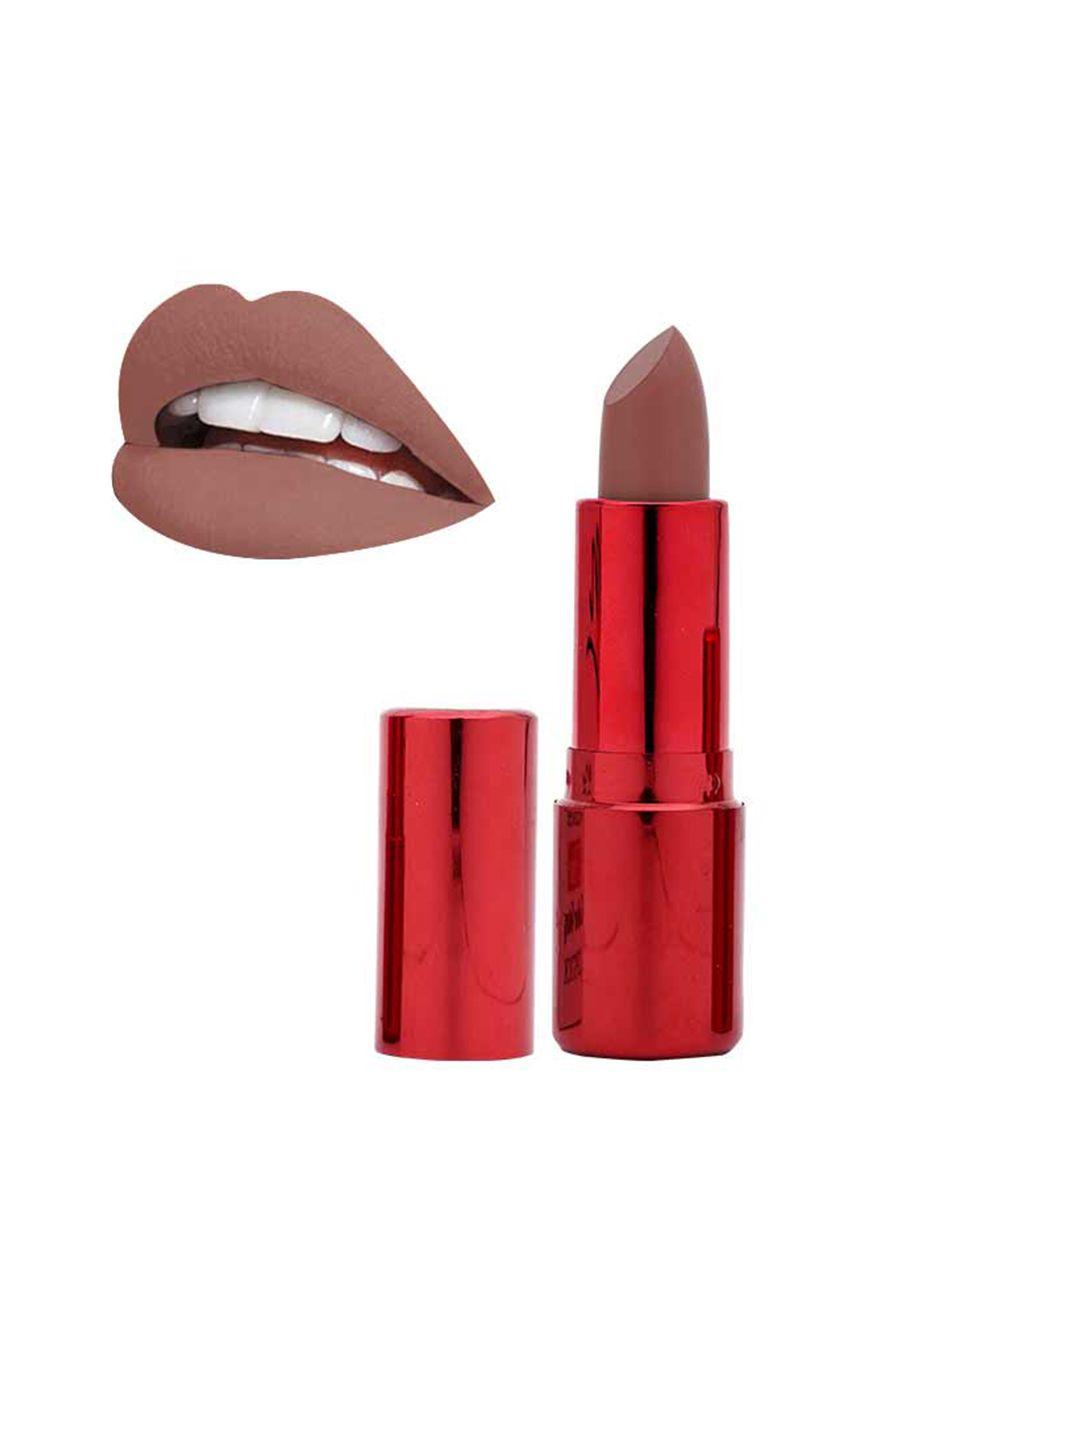 beautyrelay london 12 hour color stay lipstick with vitamin c 3.5g - rust red